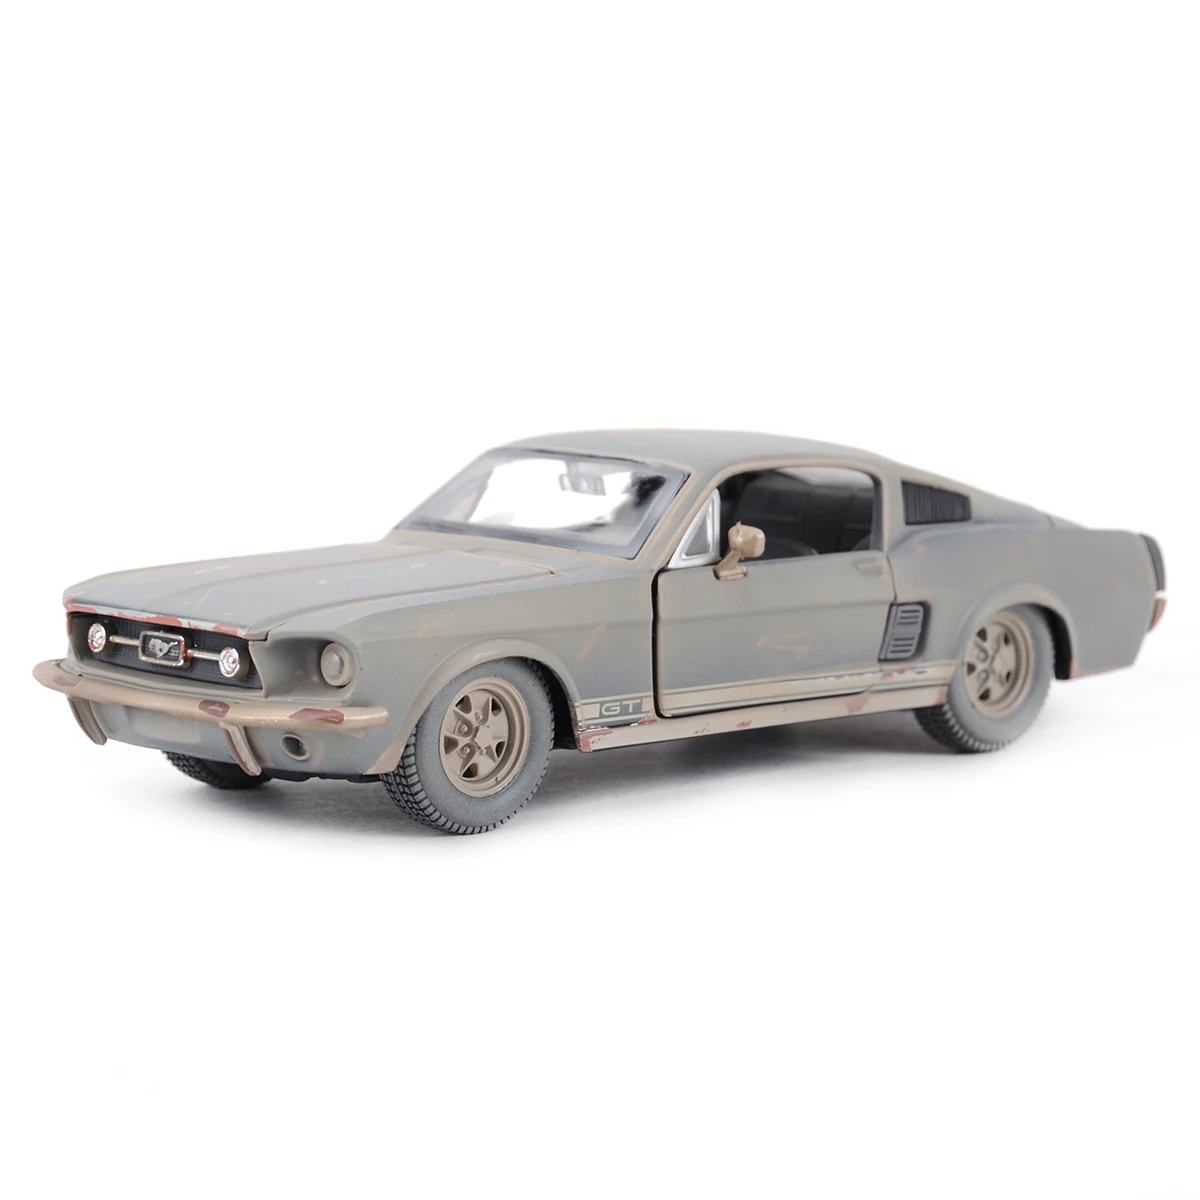 

Maisto 1:24 1967 Ford Mustang GT Retro Sports Car Static Die Cast Vehicles Collectible Model Car Toys